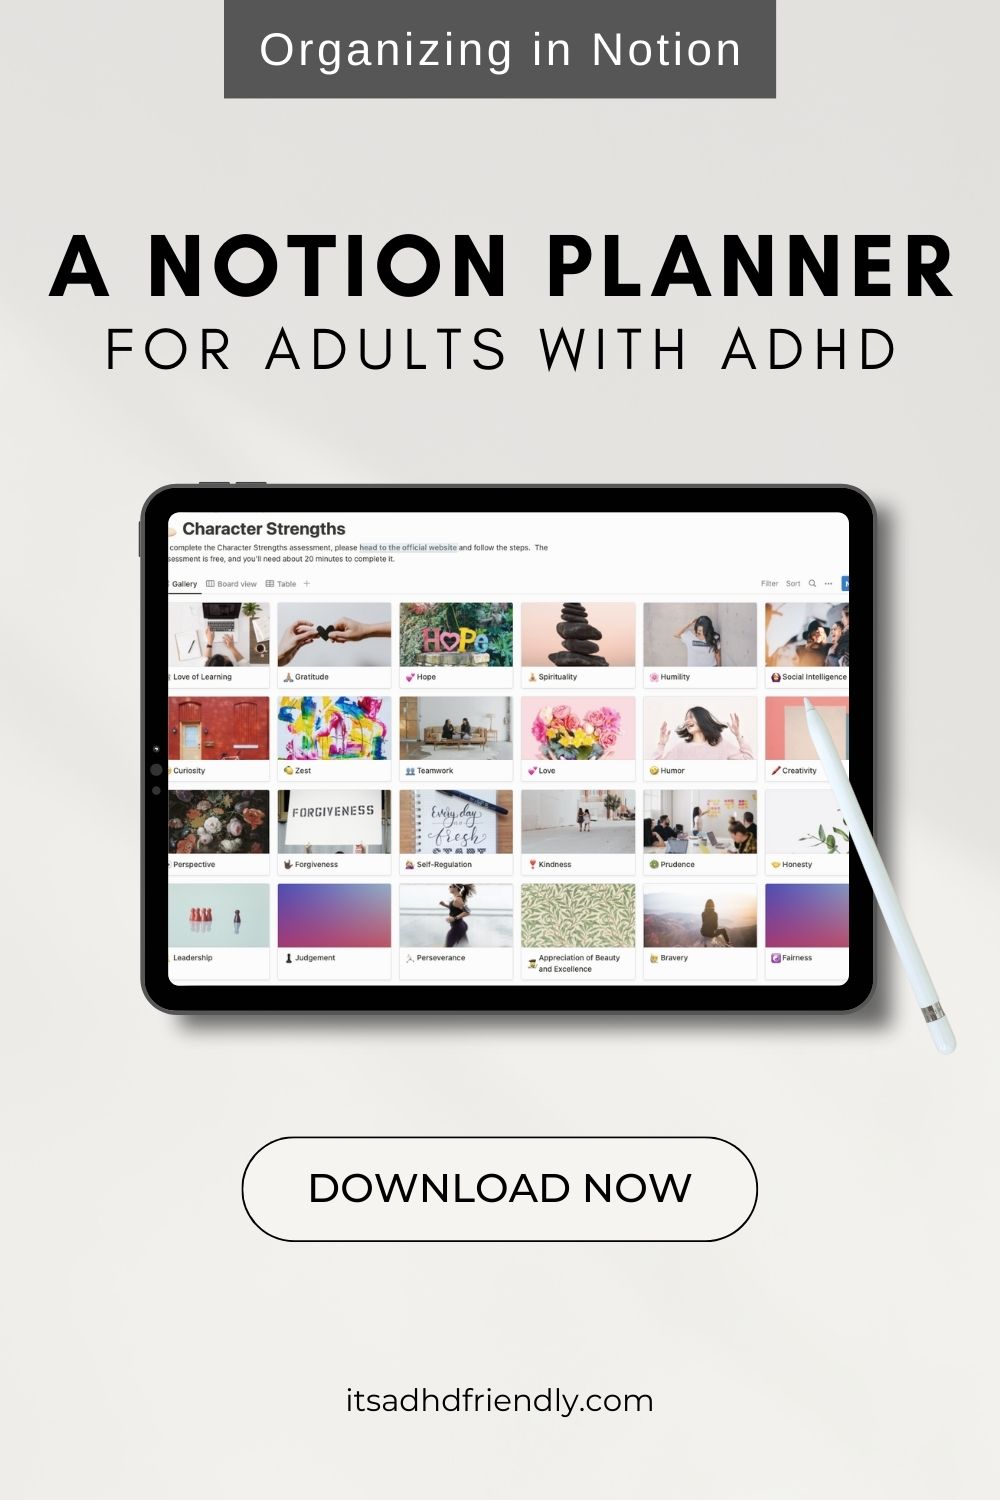 A planning template for ADHD in notion